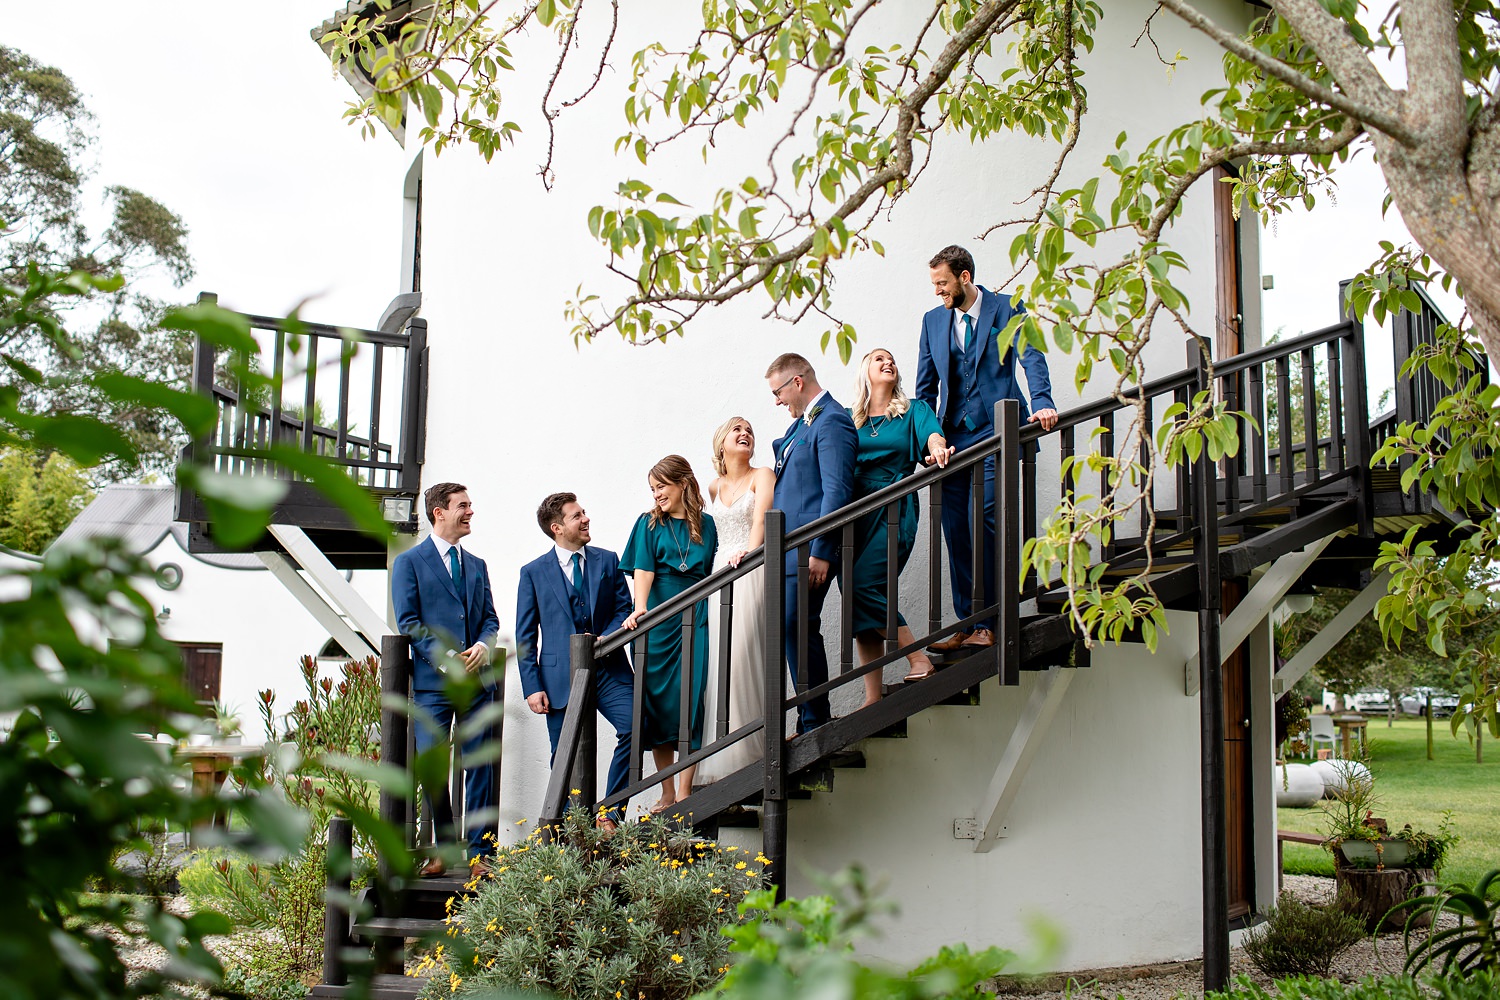 Creative ideas for bridal party photographs by wedding photographer in South Africa, Niki M Photography